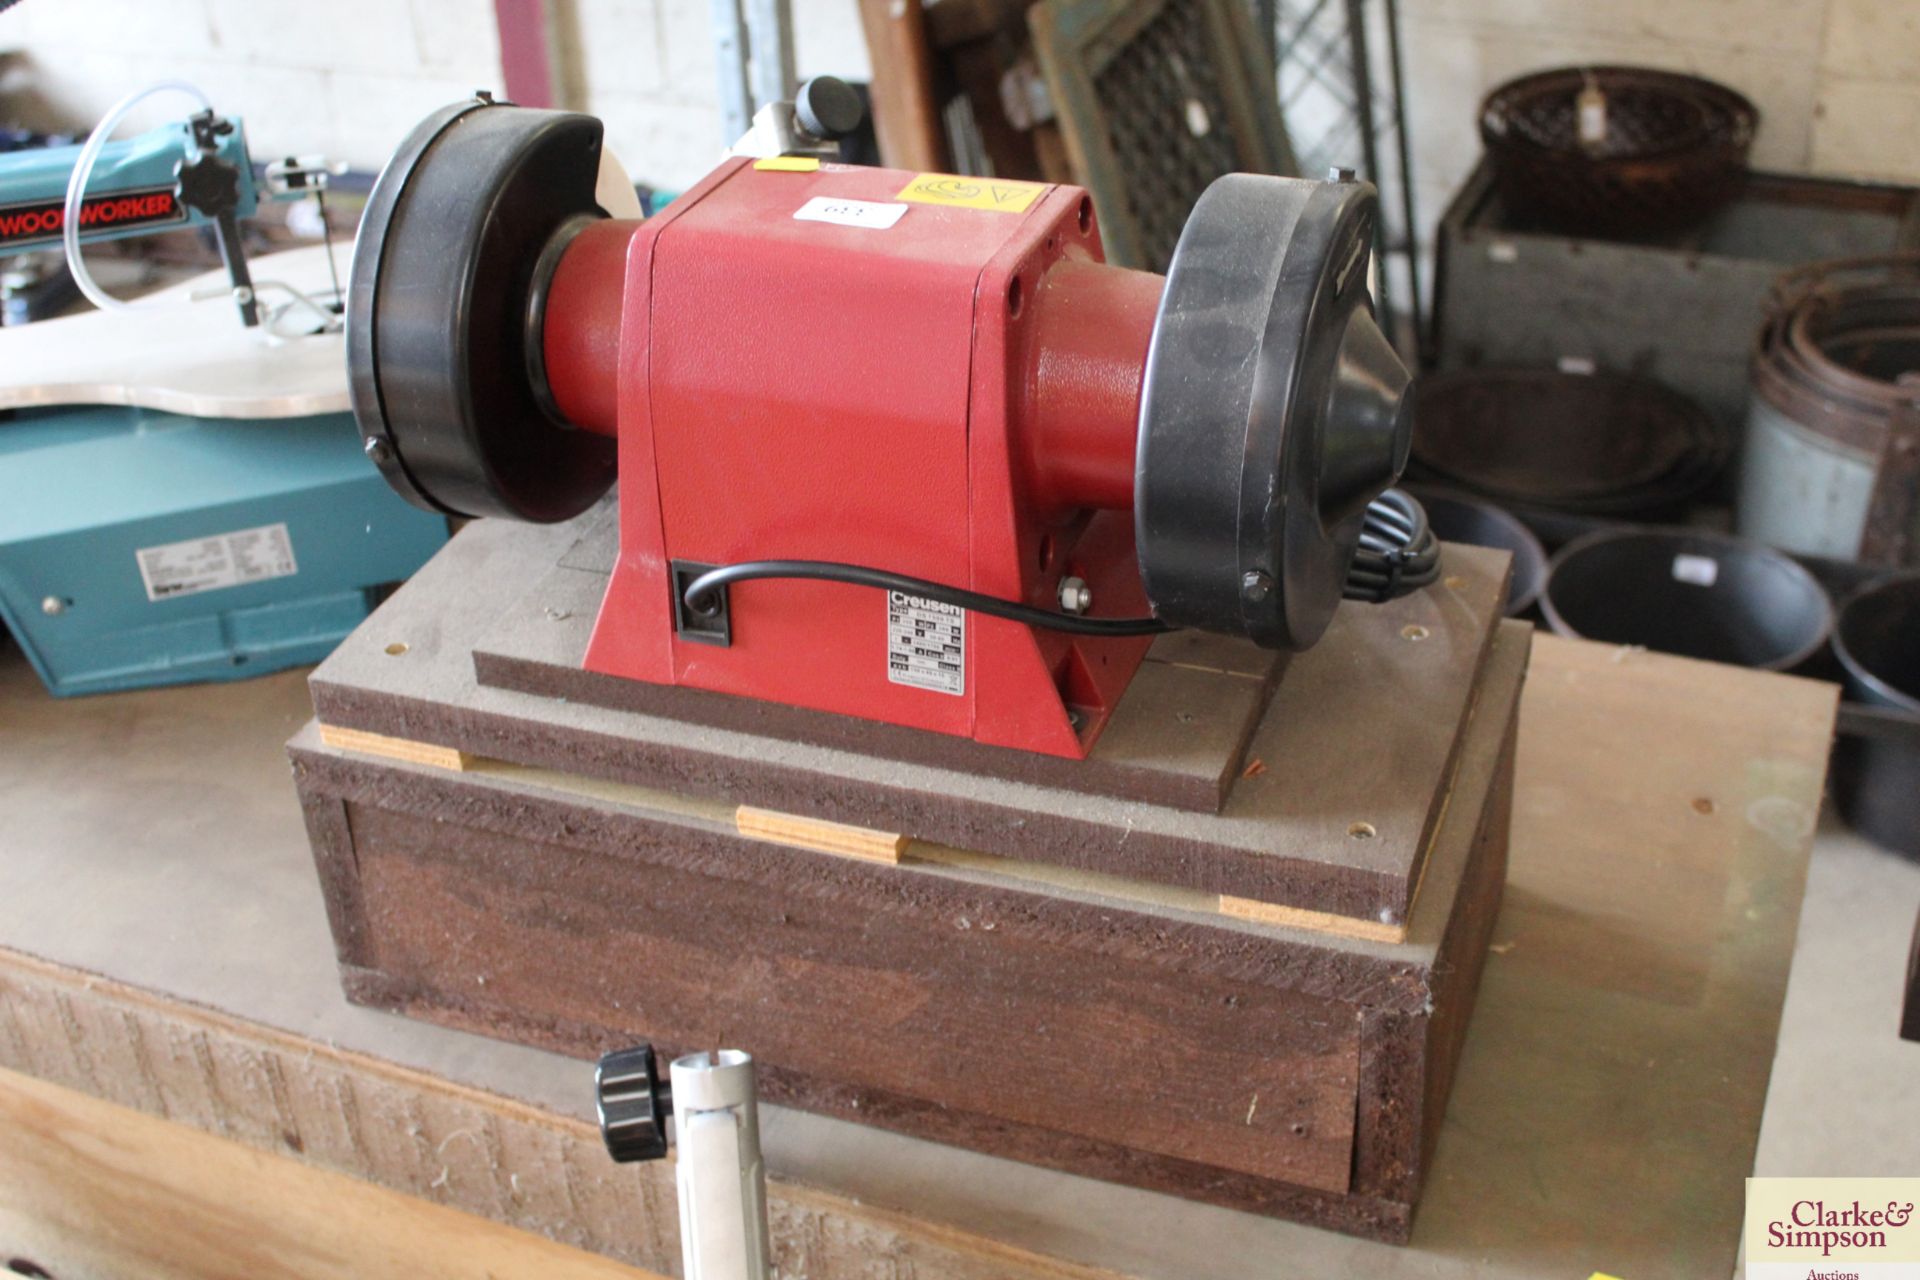 Creusen DS7500TS 240v double bench grinder with sharpening guide on wooden plinth. - Image 5 of 6